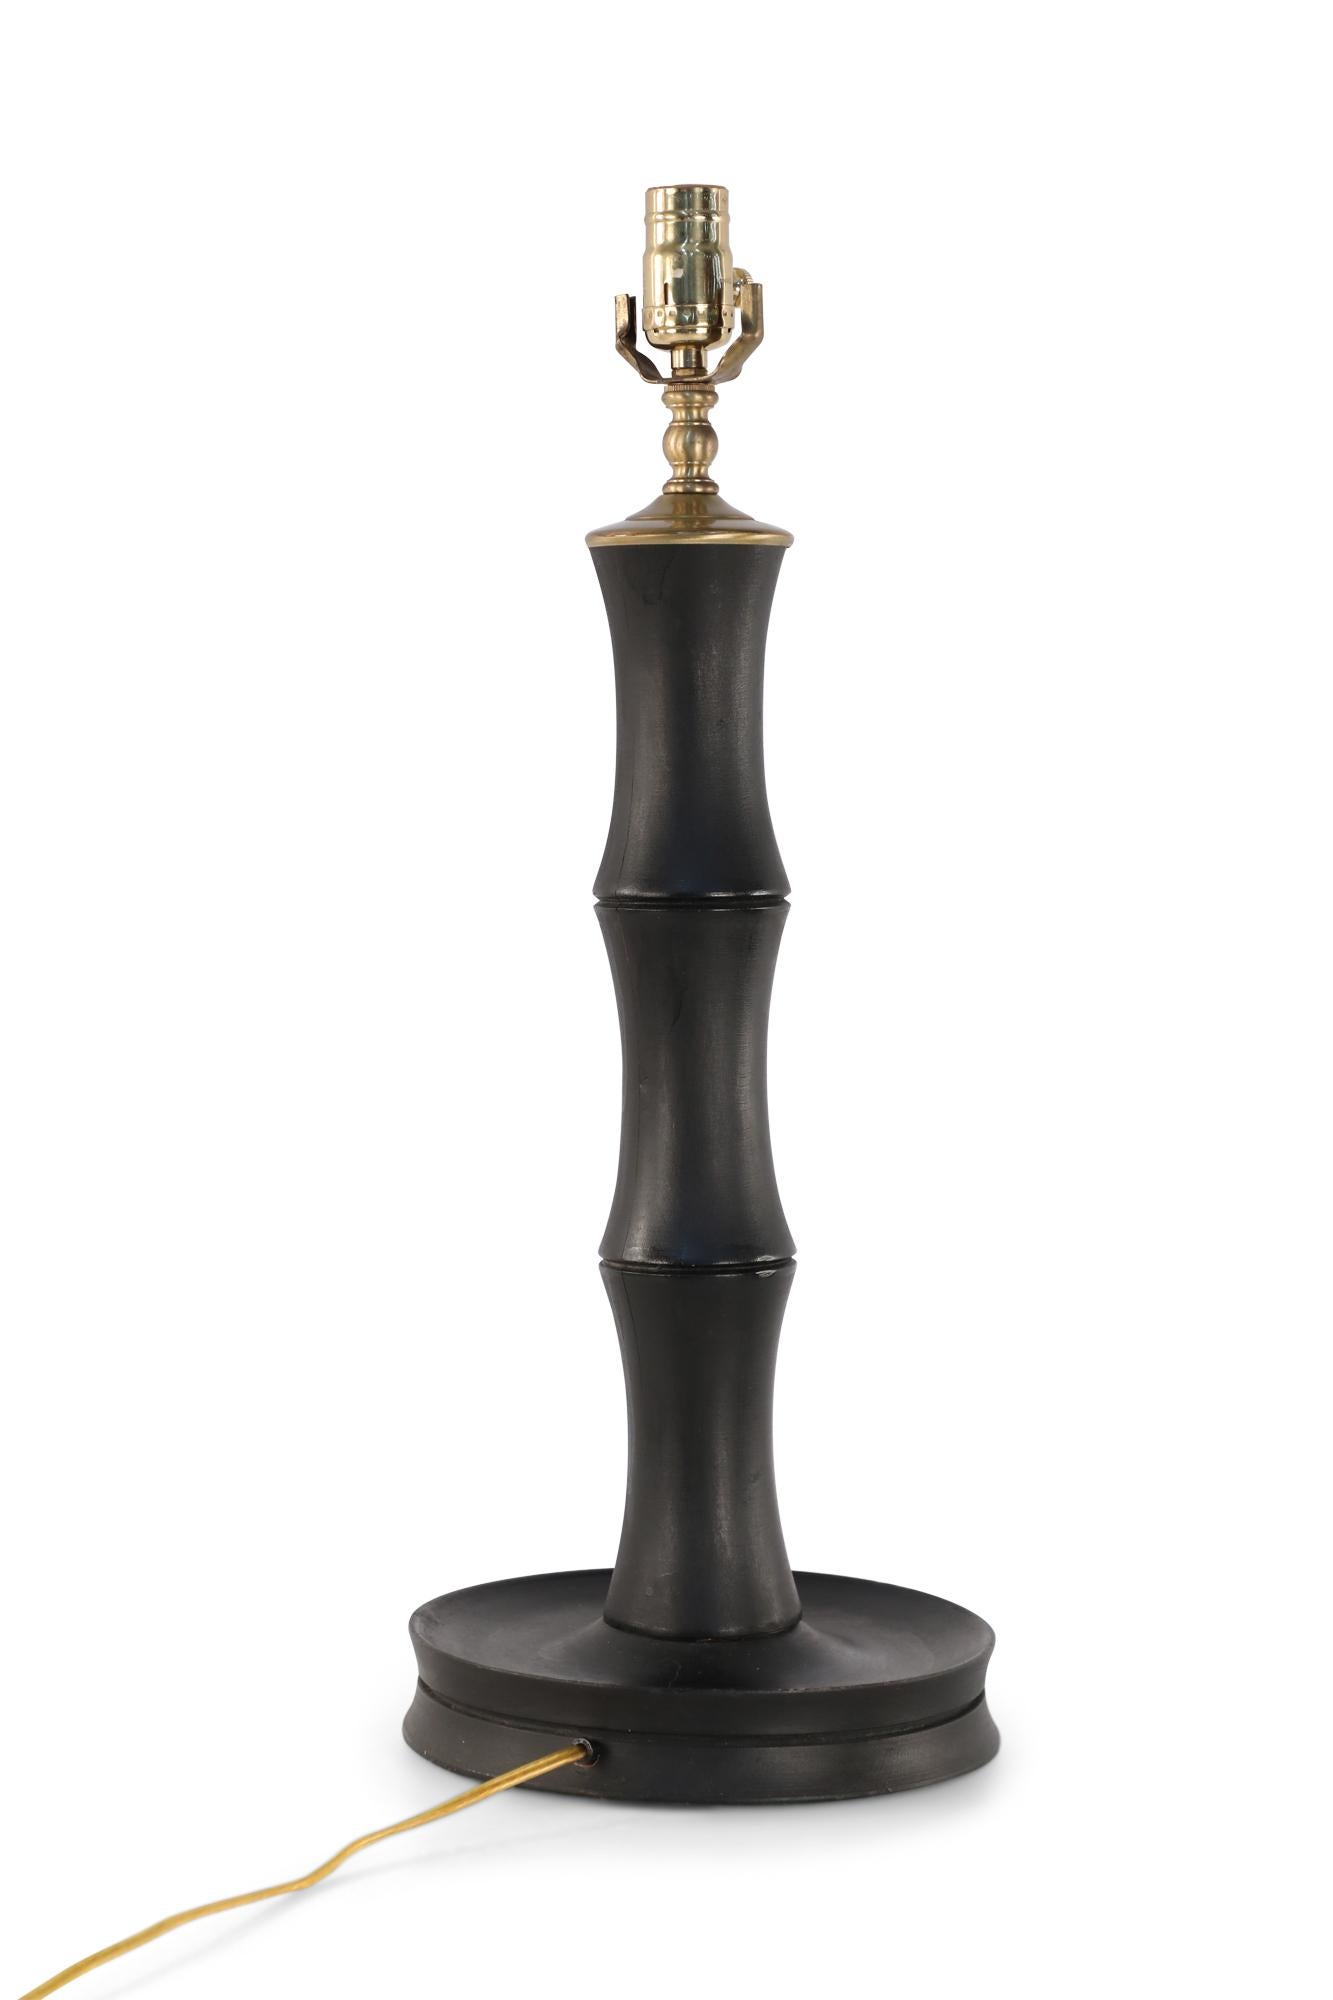 Pair of Chinese faux bamboo table lamps made from black painted wood and brass hardware.